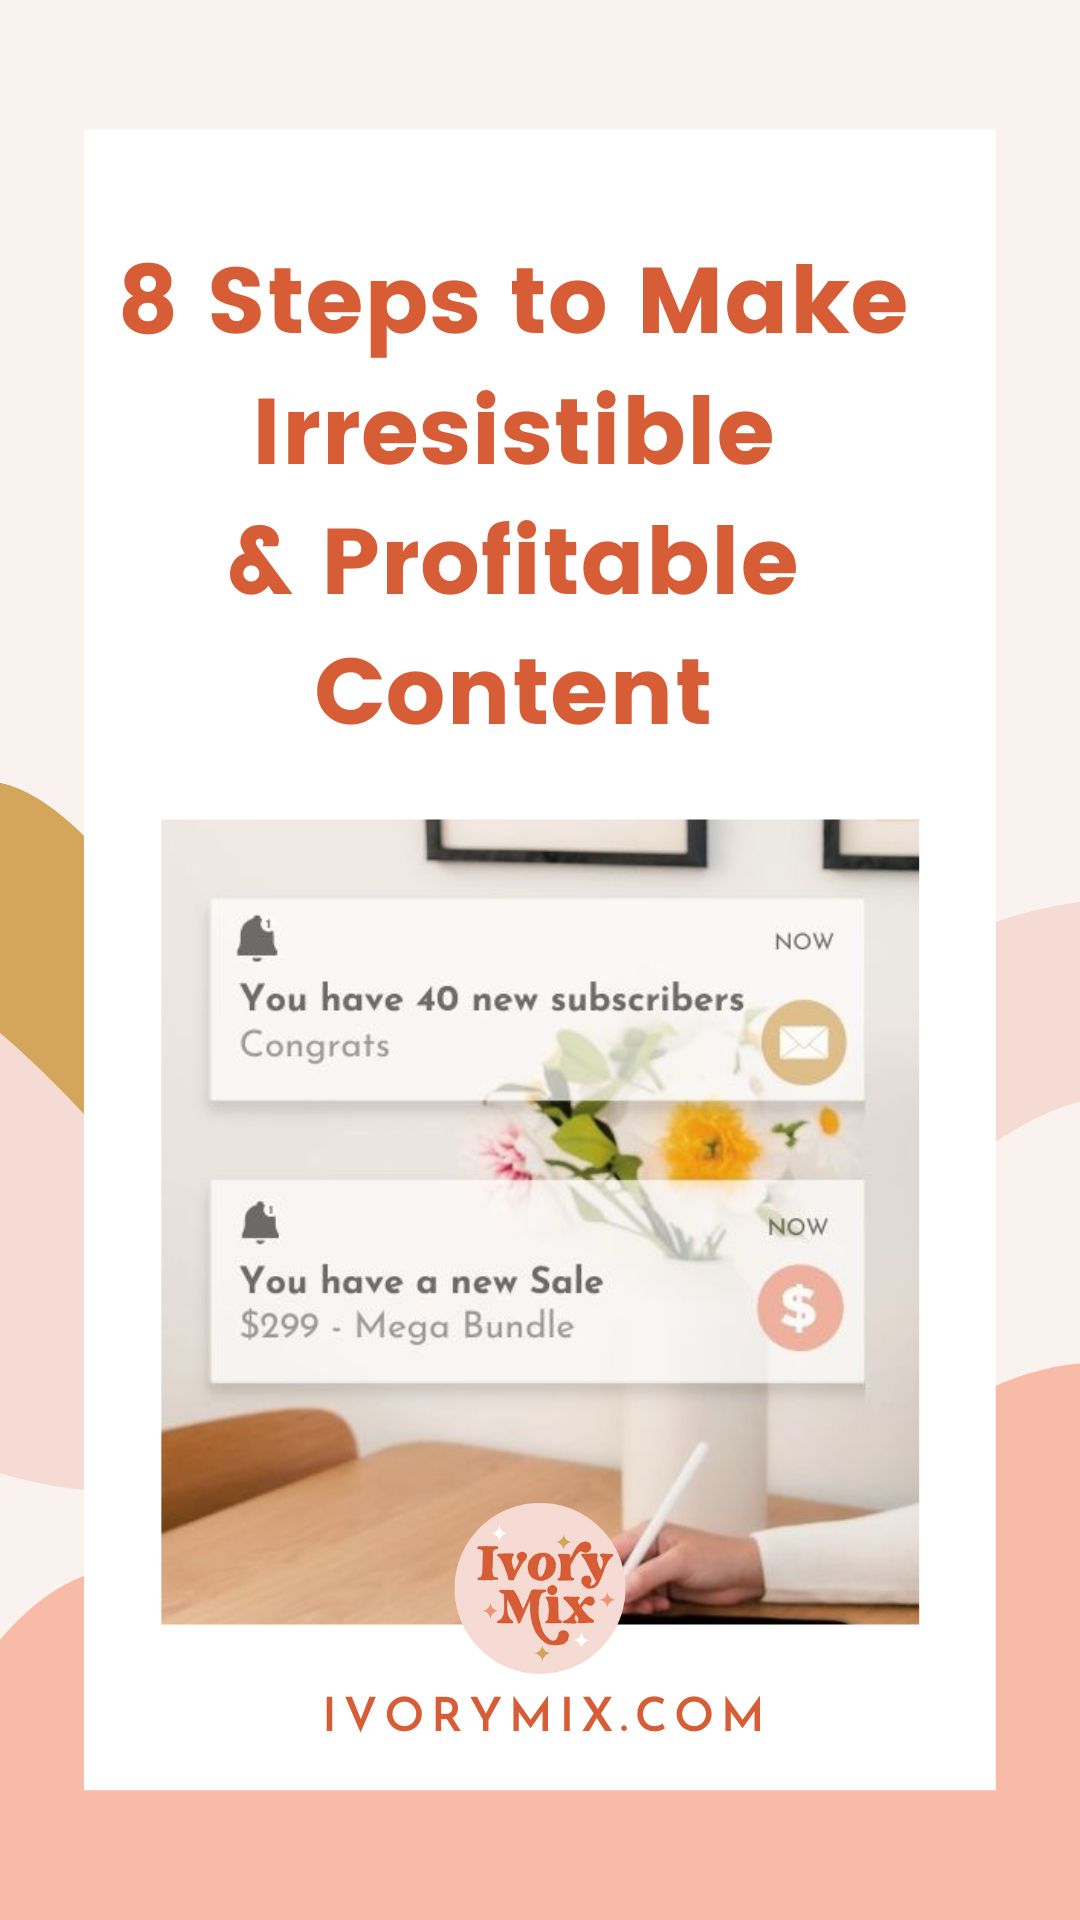 8 steps to make irresistible and profitable content